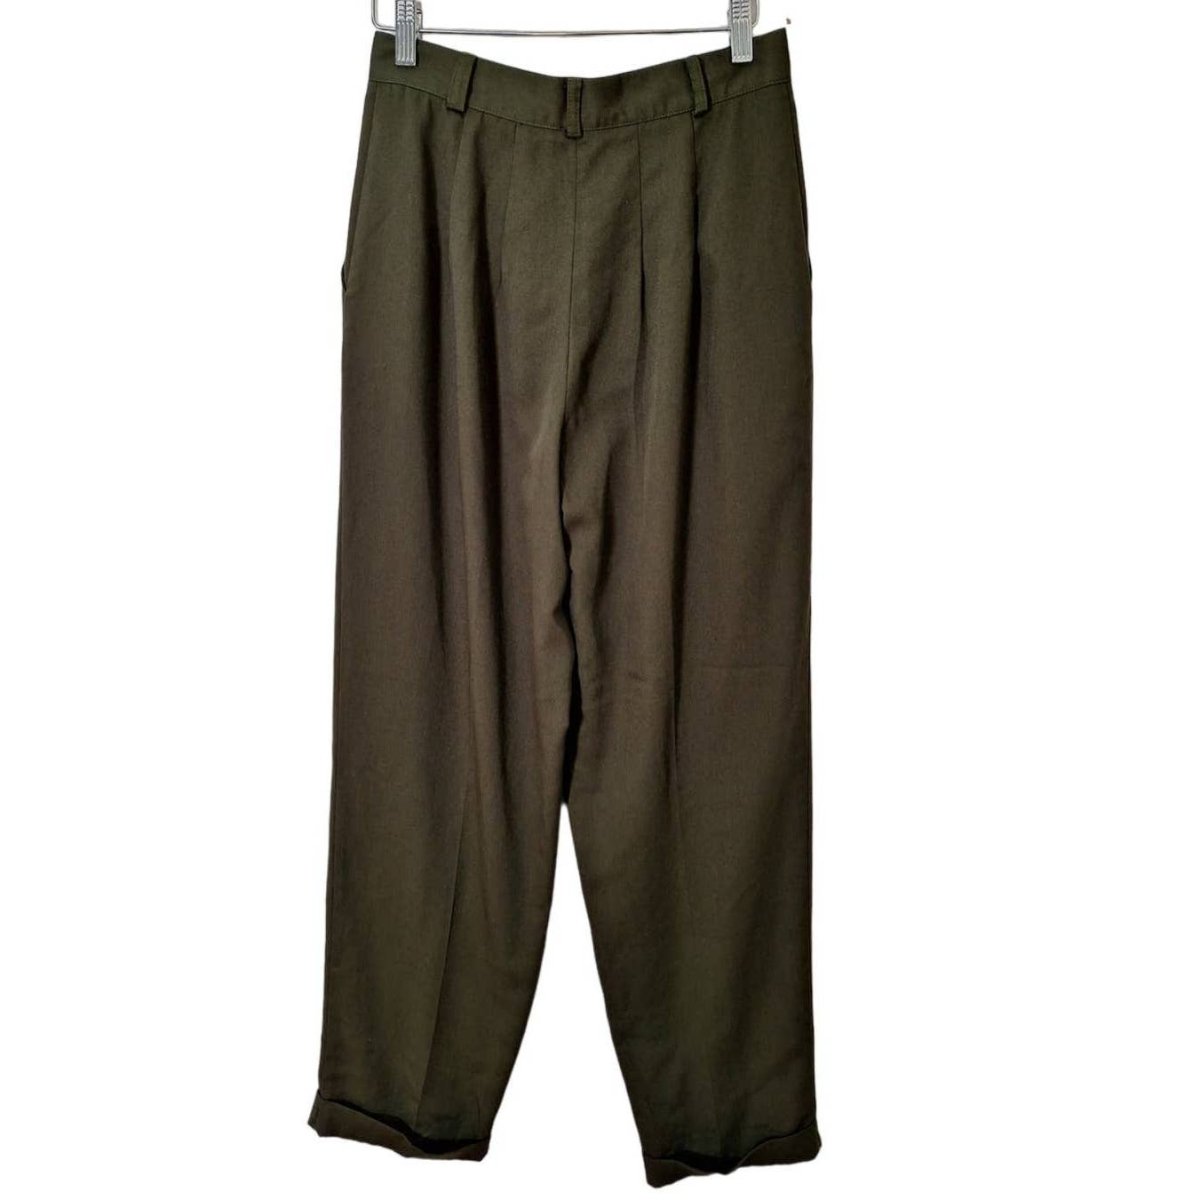 80s/90s Olive Green Baggy Pleated Pants Size Medium Waist 29" - themallvintage The Mall Vintage